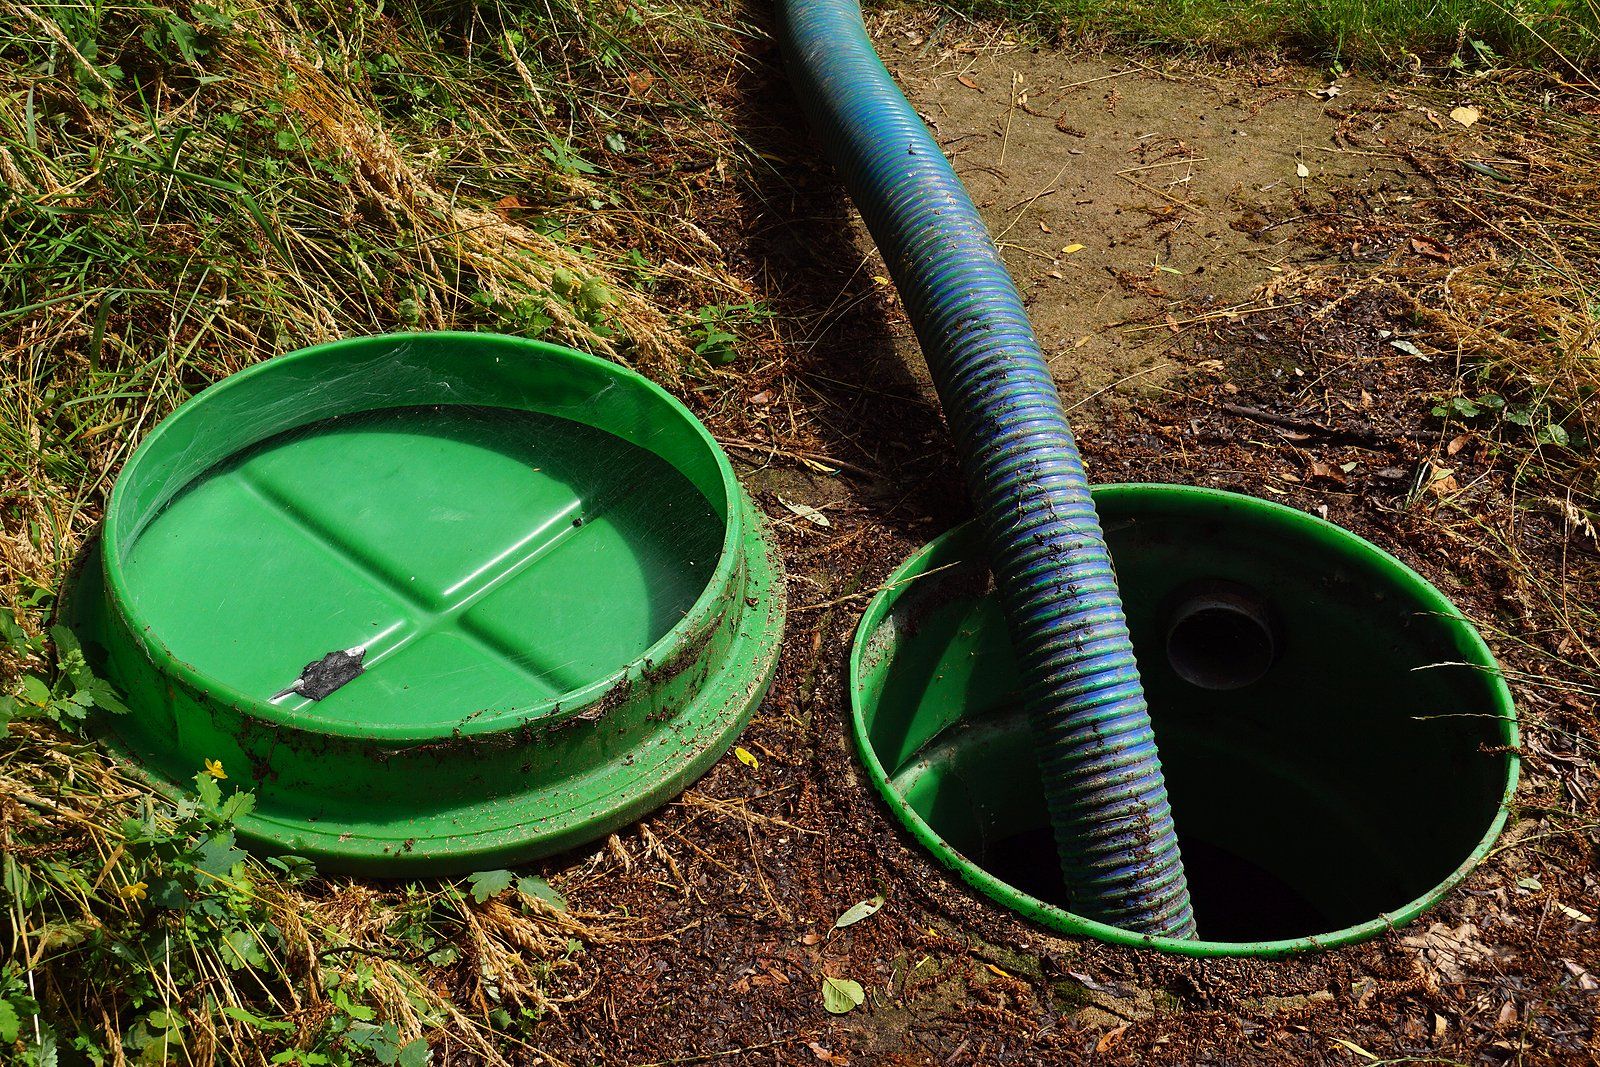 Septic Services in Lake County, IL